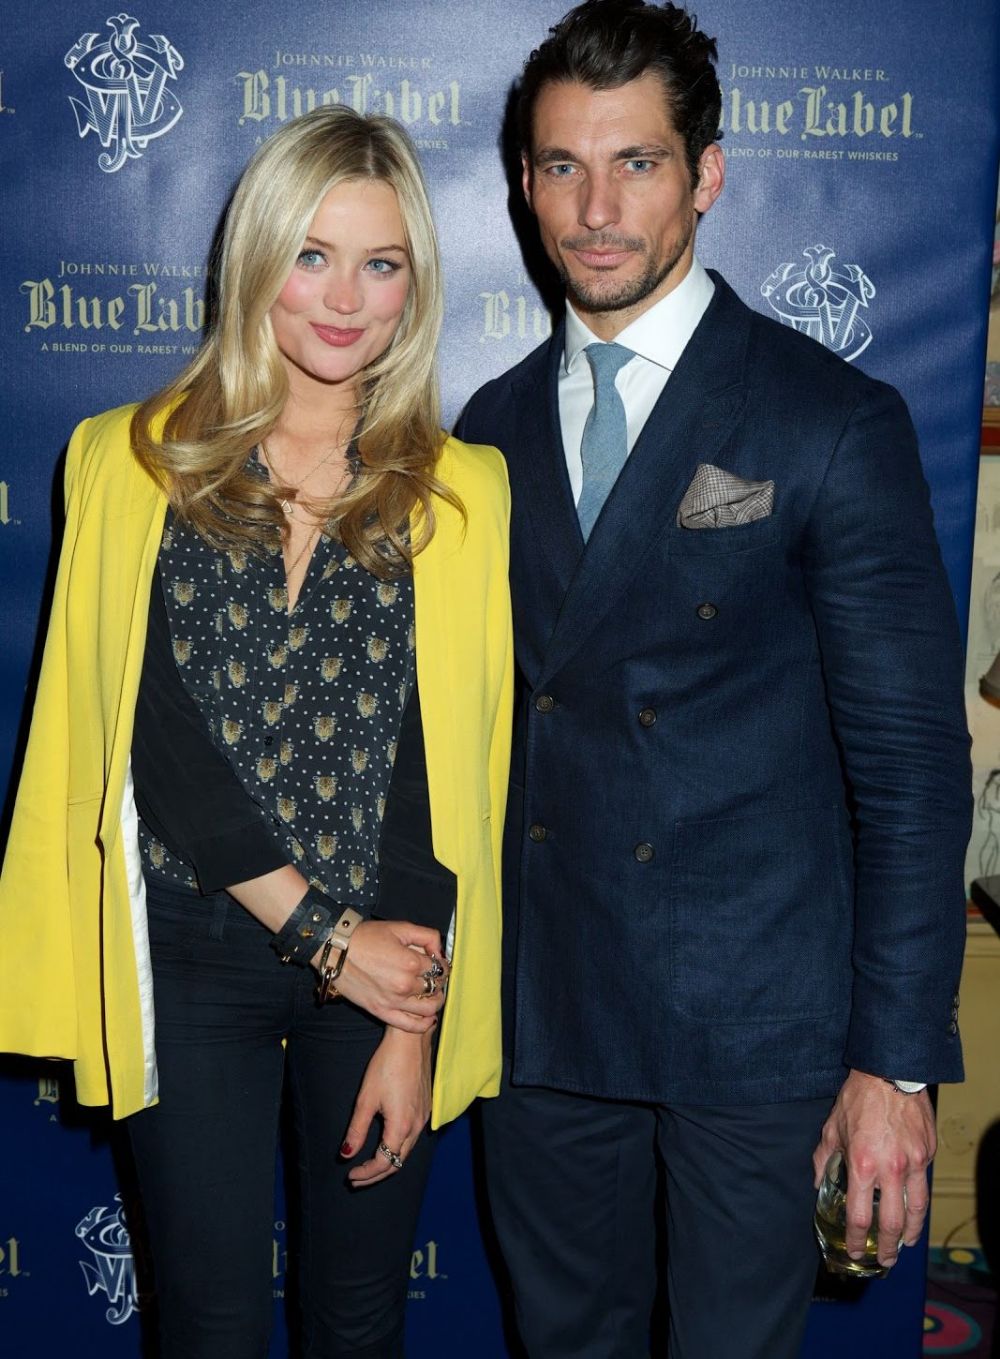 David Gandy and Laura Whitmore - FamousFix